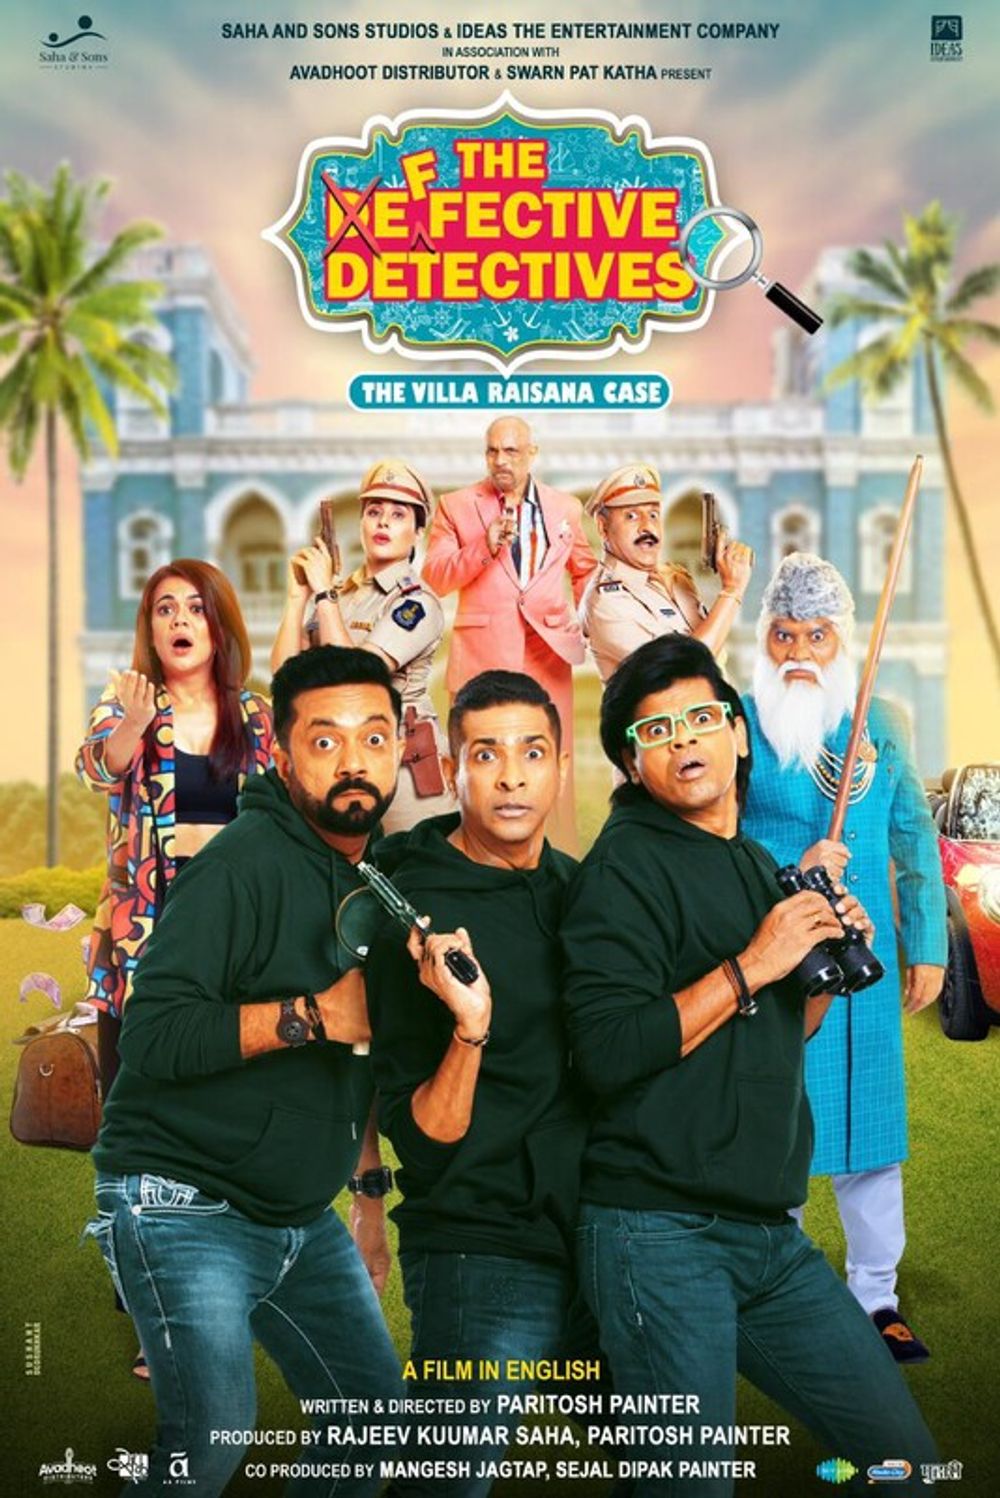 The Defective Detectives Movie Review